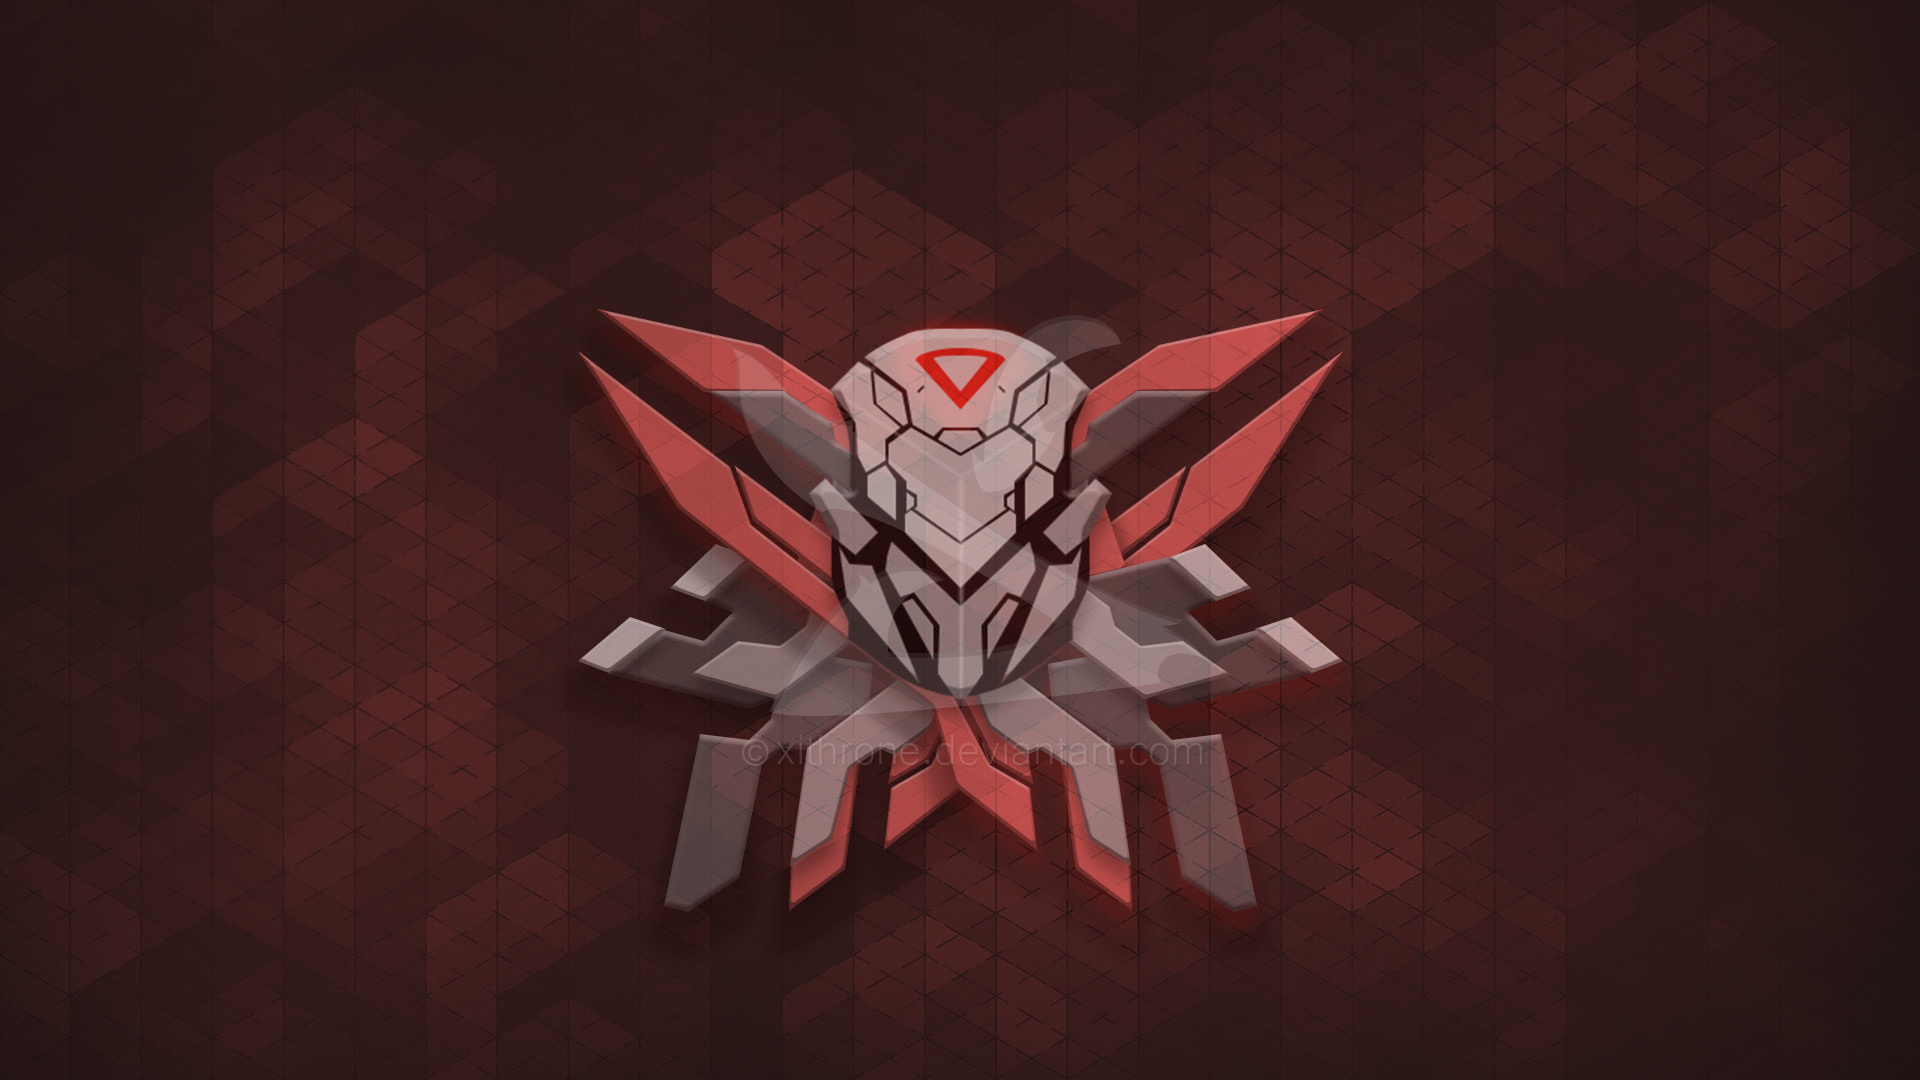 1920x1080 ... PROJECT: Zed Minimalist - League of Legends by Xithrone